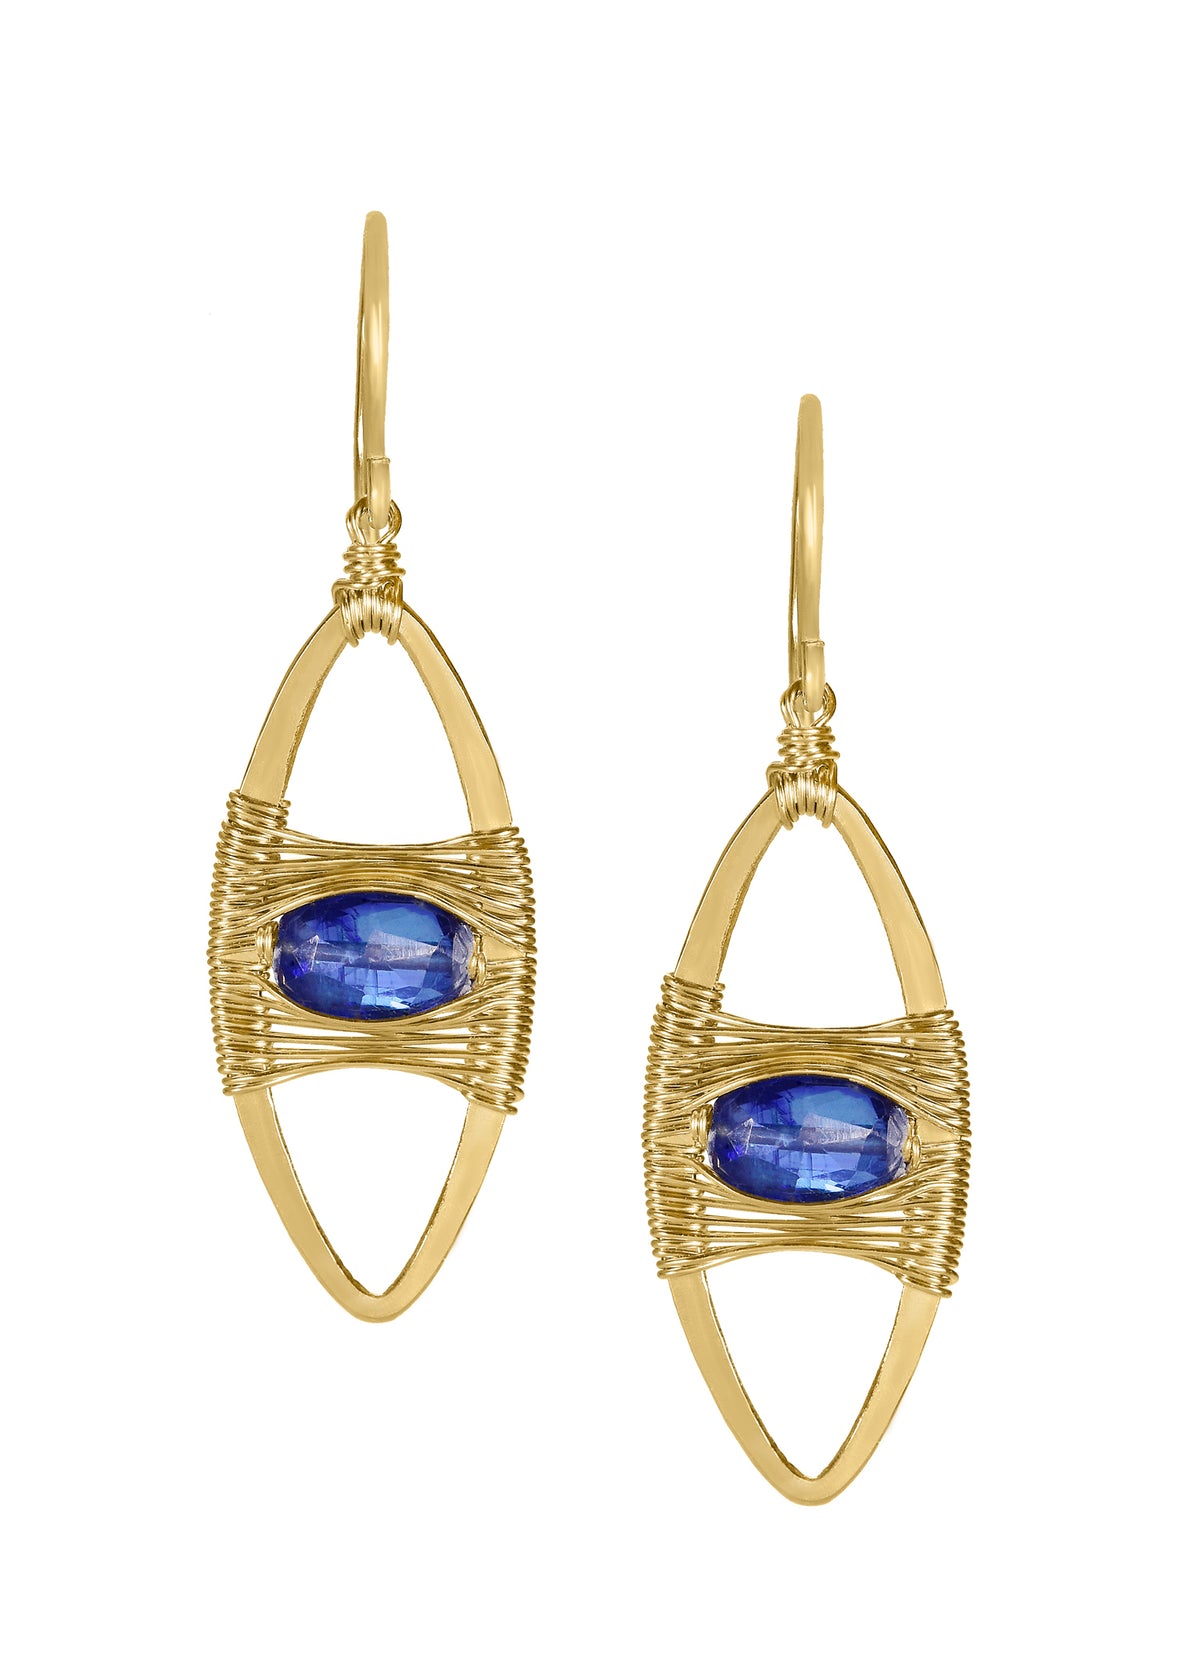 Kyanite 14k gold fill Earrings measure 1-3/8&quot; in length (including the ear wires) and 3/8&quot; in width at the widest point Handmade in our Los Angeles studio